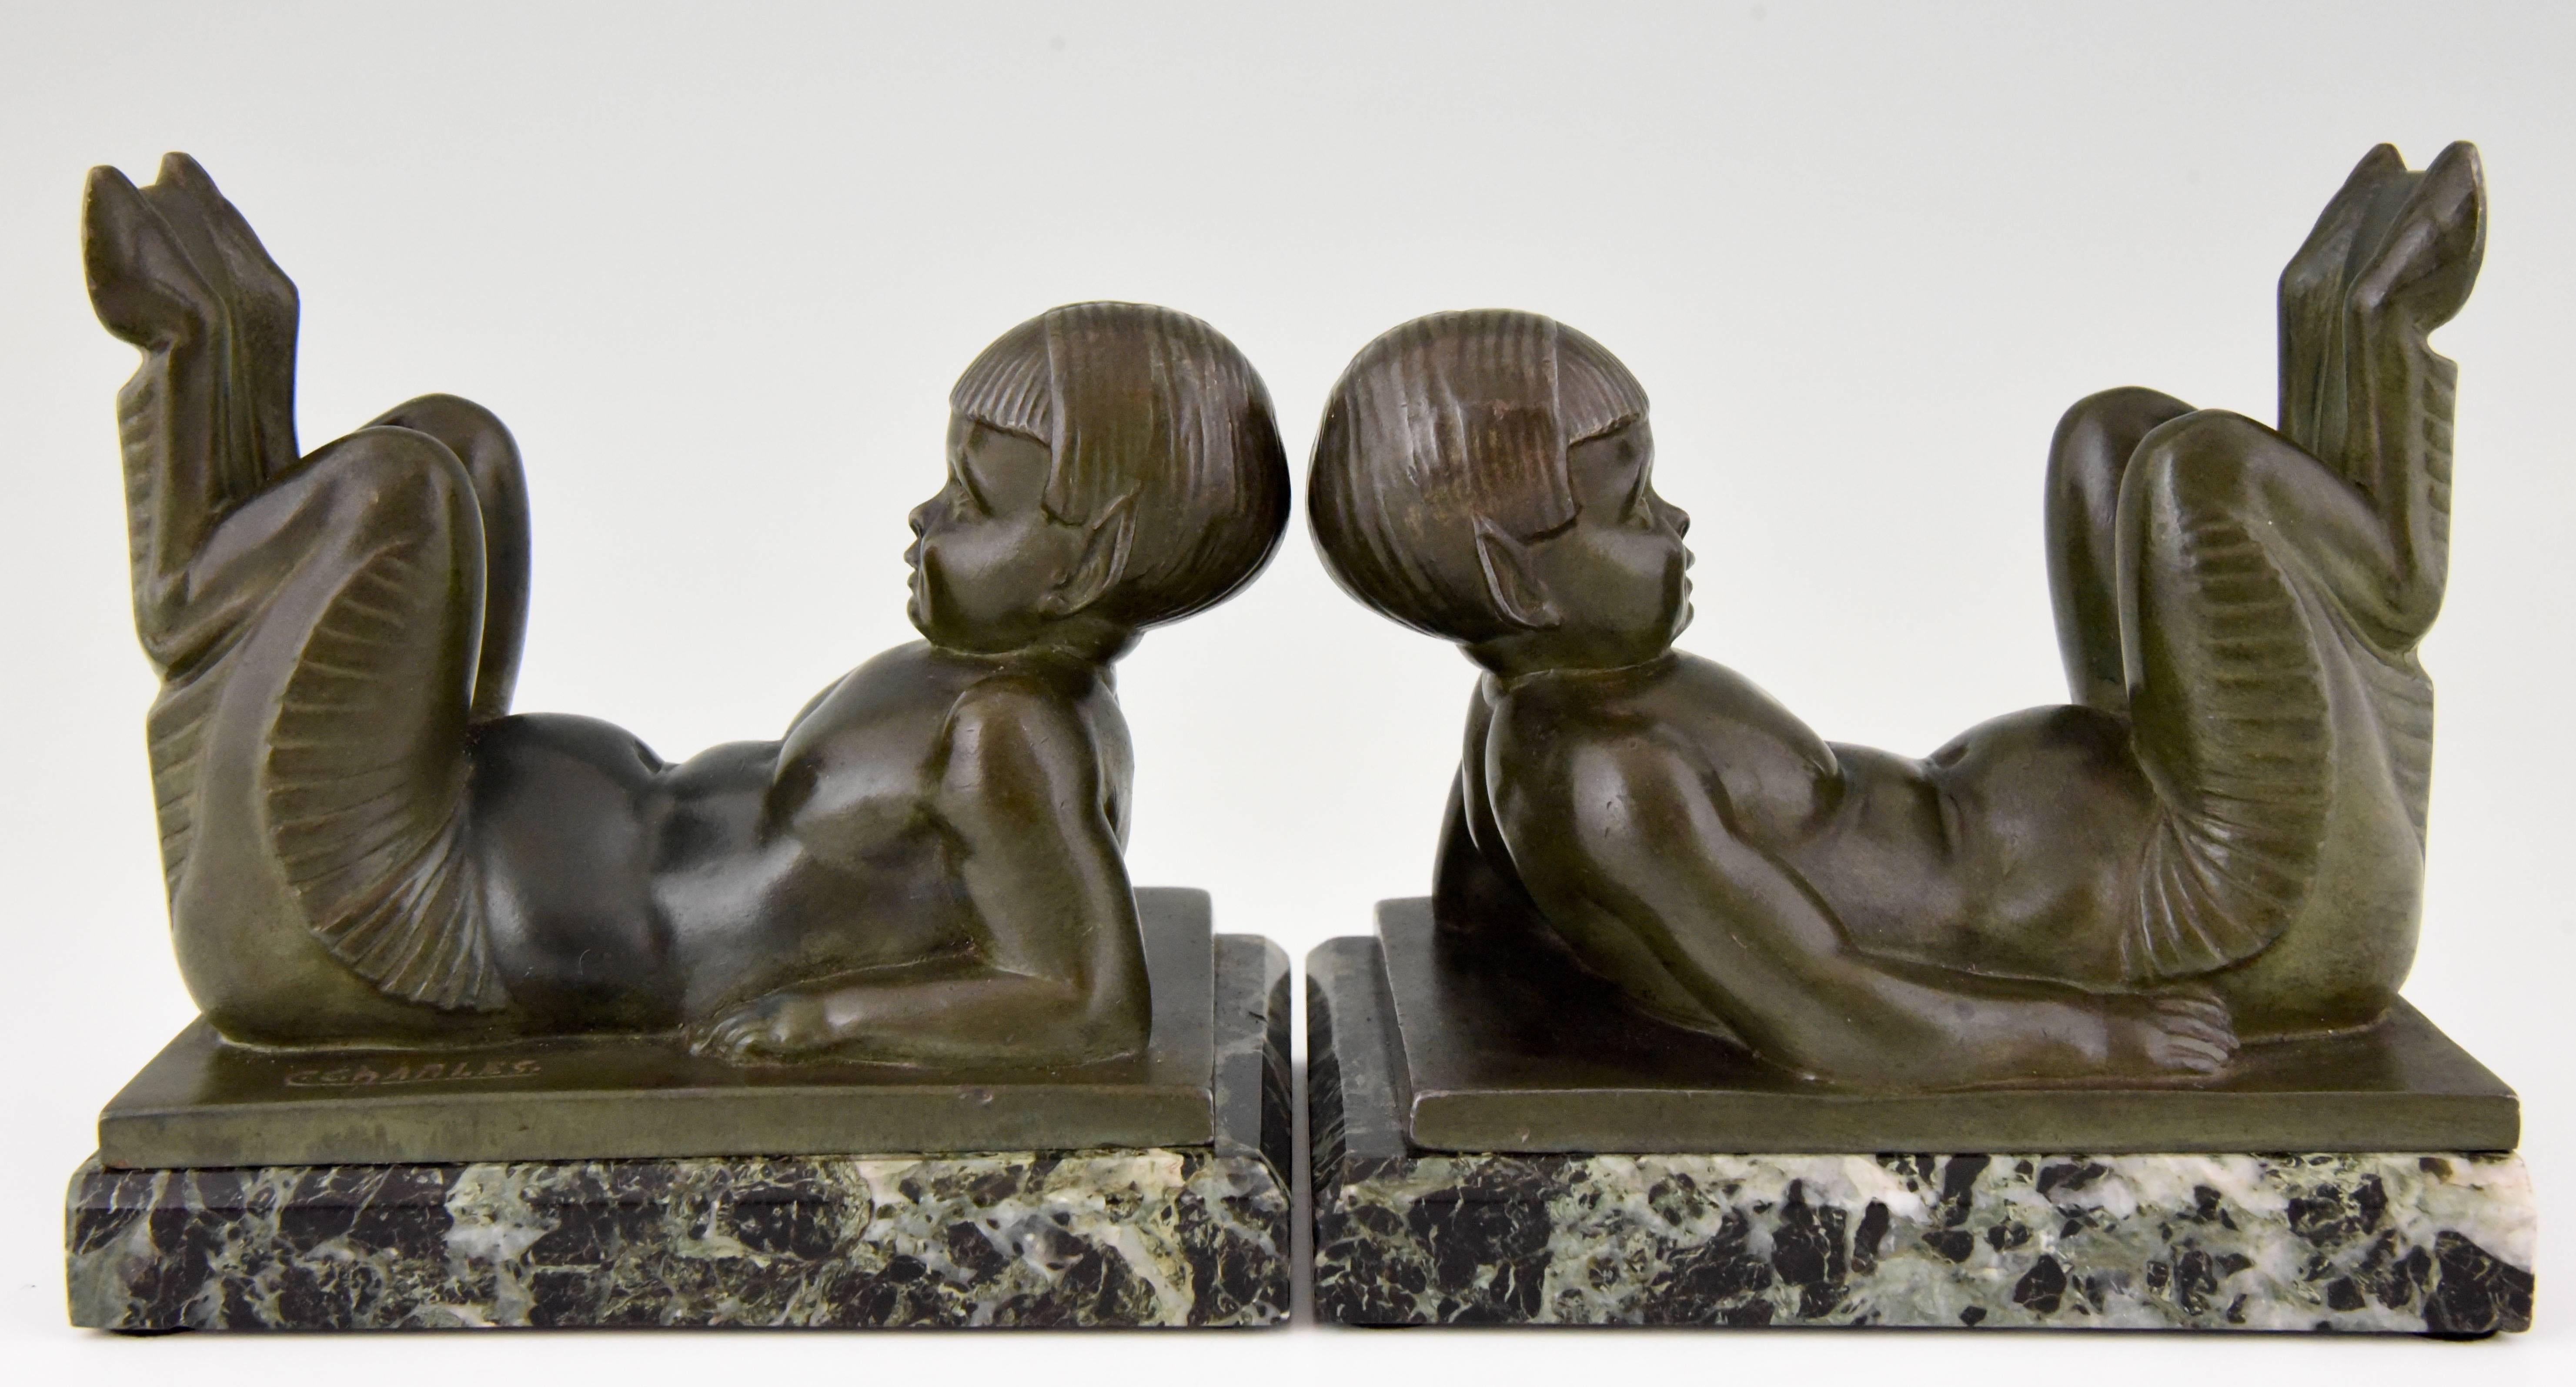 Lovely pair of Art Deco bookends with lying young satyrs by the French artist C. Charles.

Artist/maker: Charles Charles.
Signature/marks: C. Charles.
Style: Art Deco.
Date: 1930.
Material: Art metal with green patina on green marble